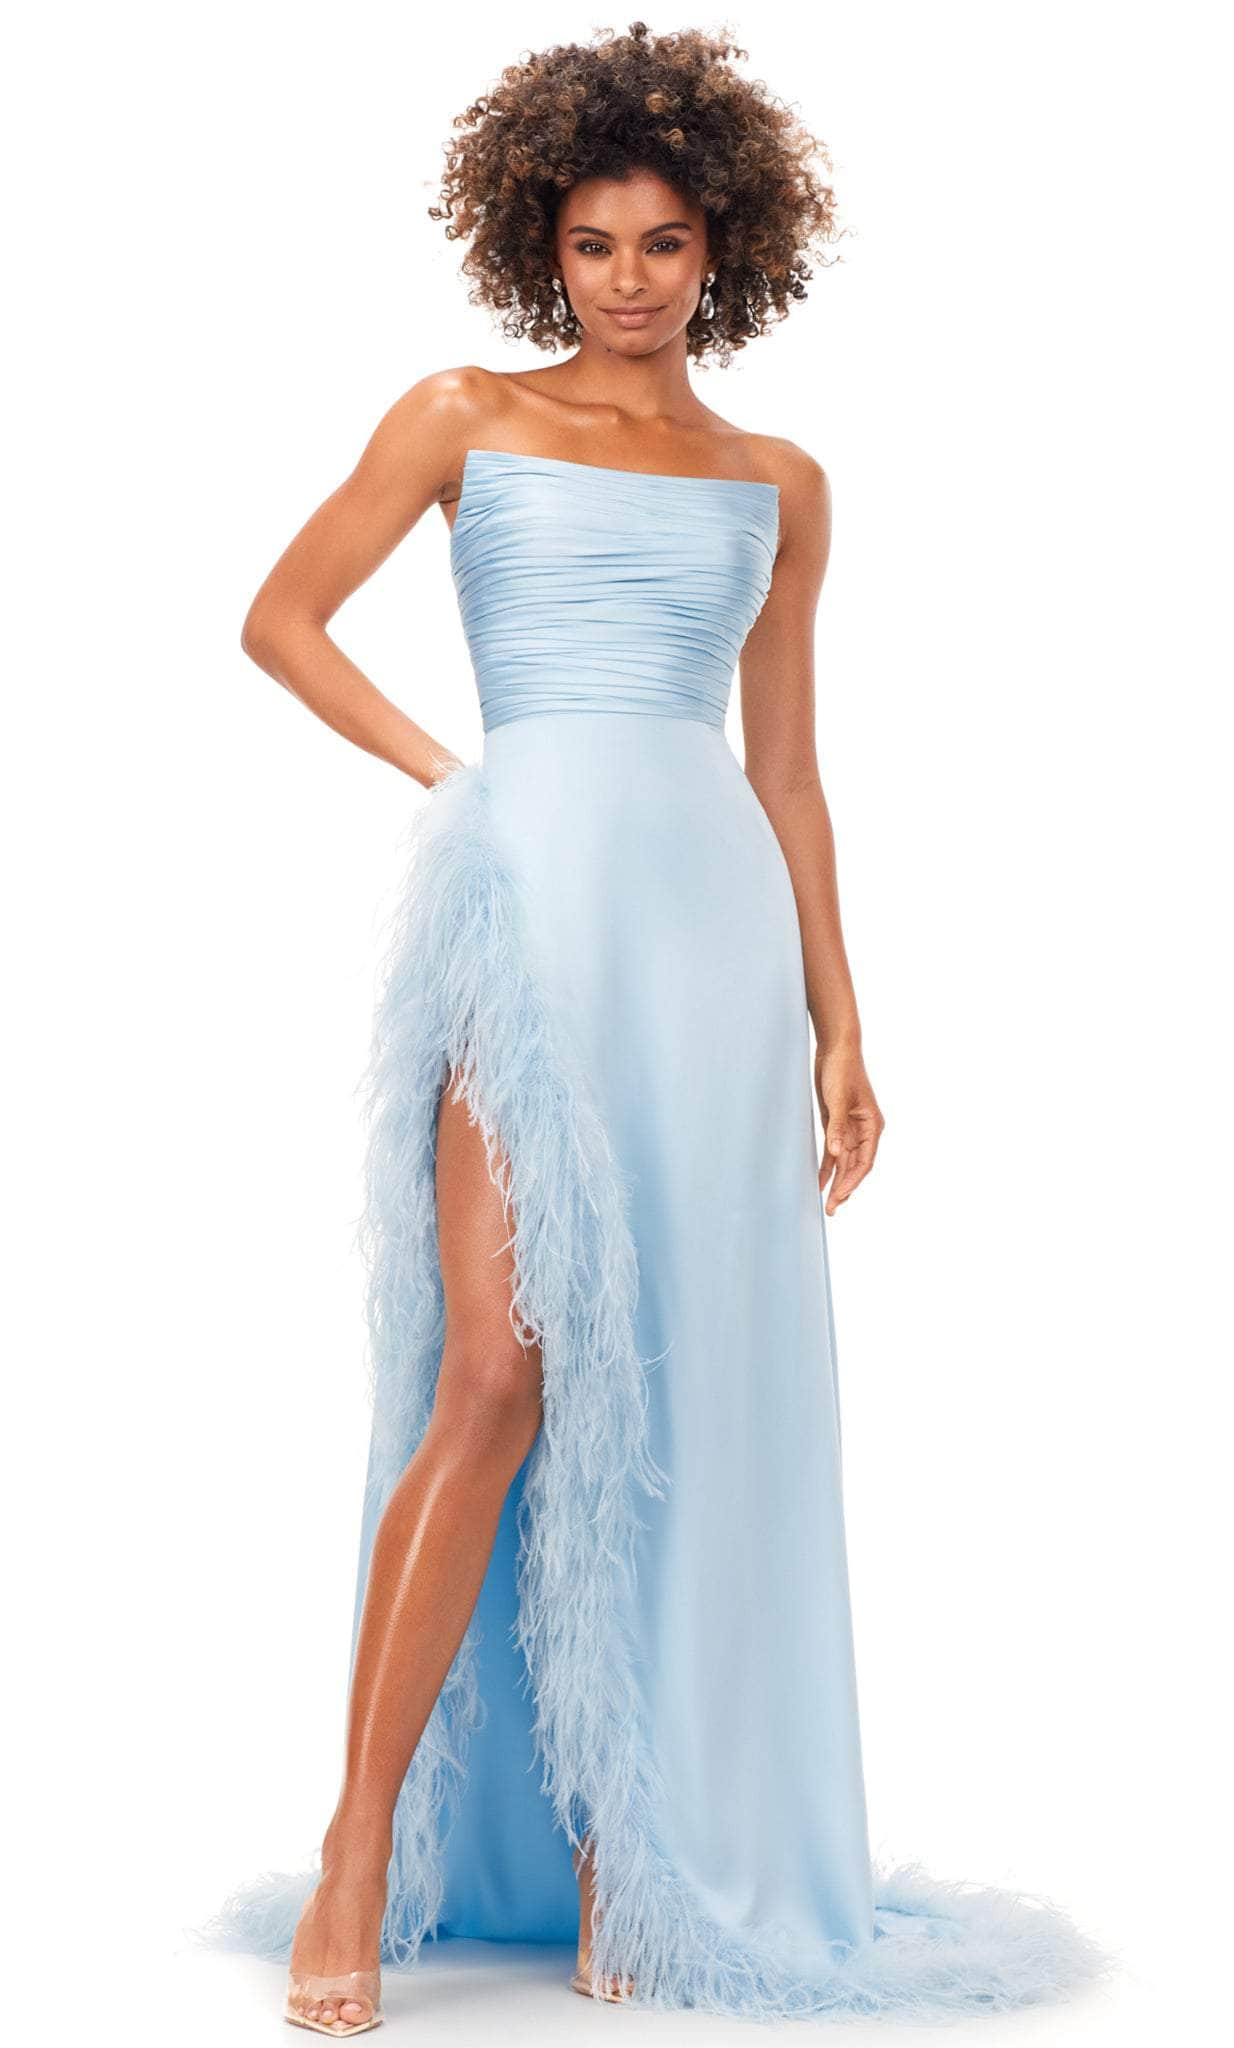 Ashley Lauren 11313 - Ruched Strapless Prom Gown Special Occasion Dress 0 / Sky